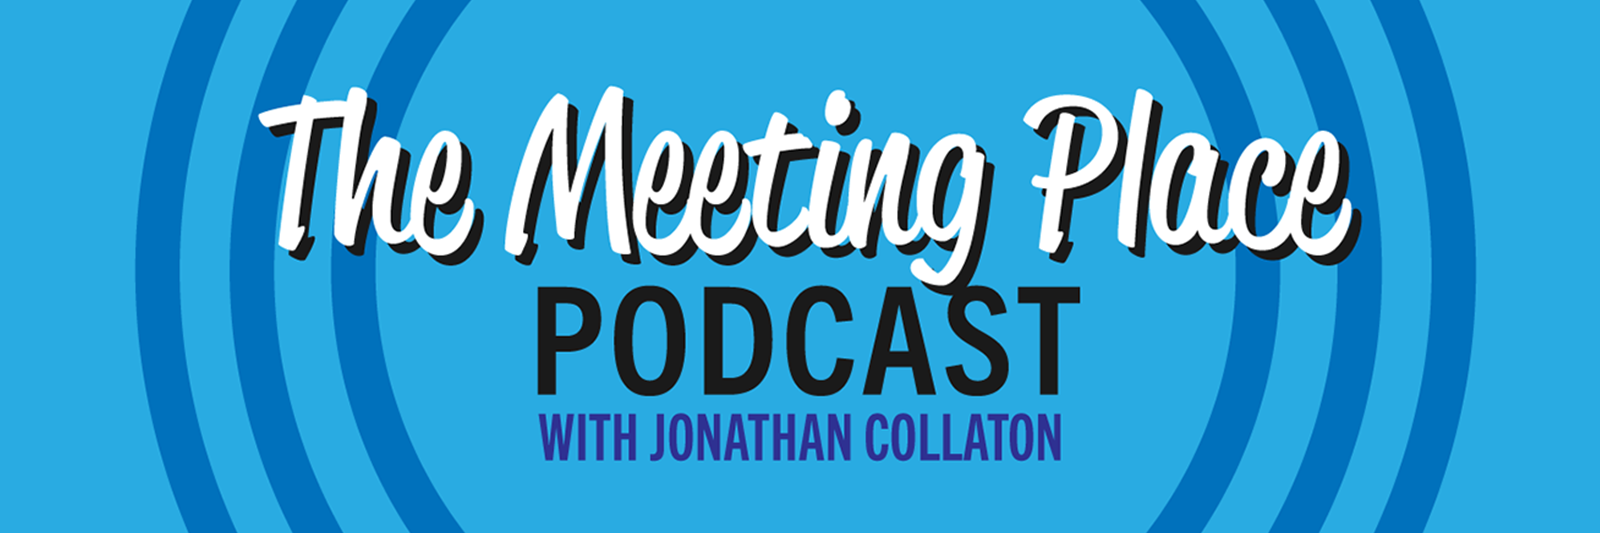 The Meeting Place Podcast